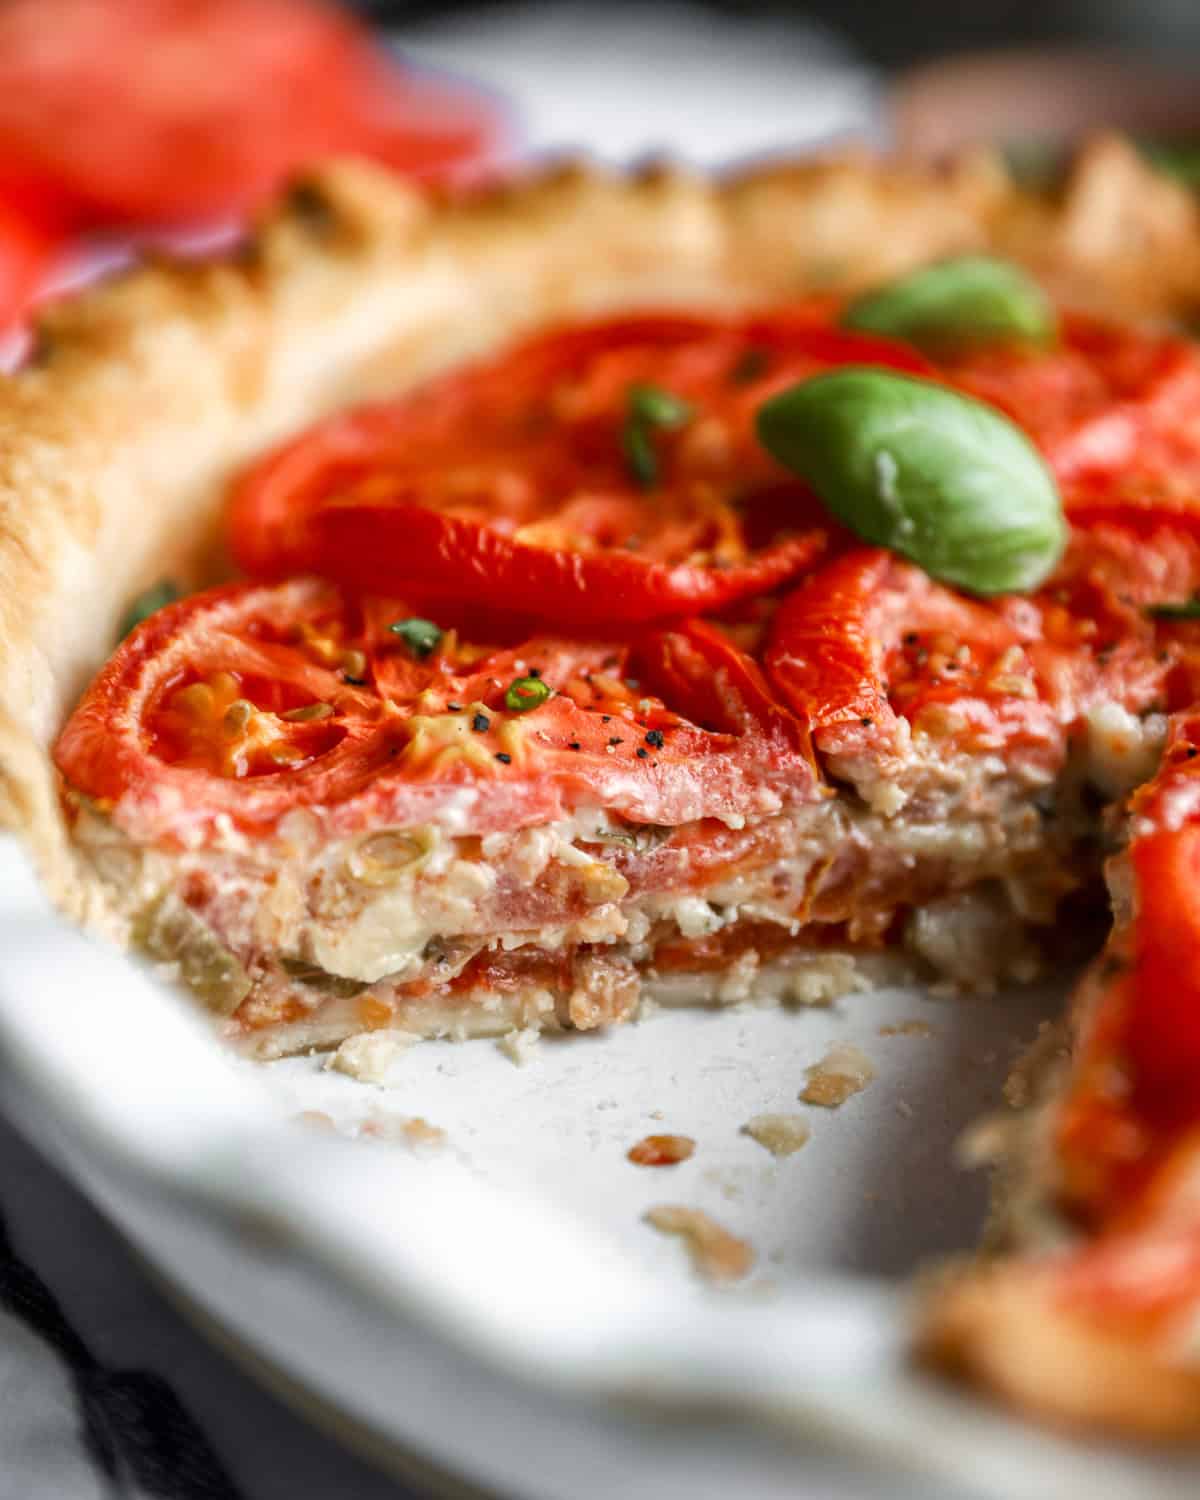 close up view of a cut tomato pie exposing the filling.